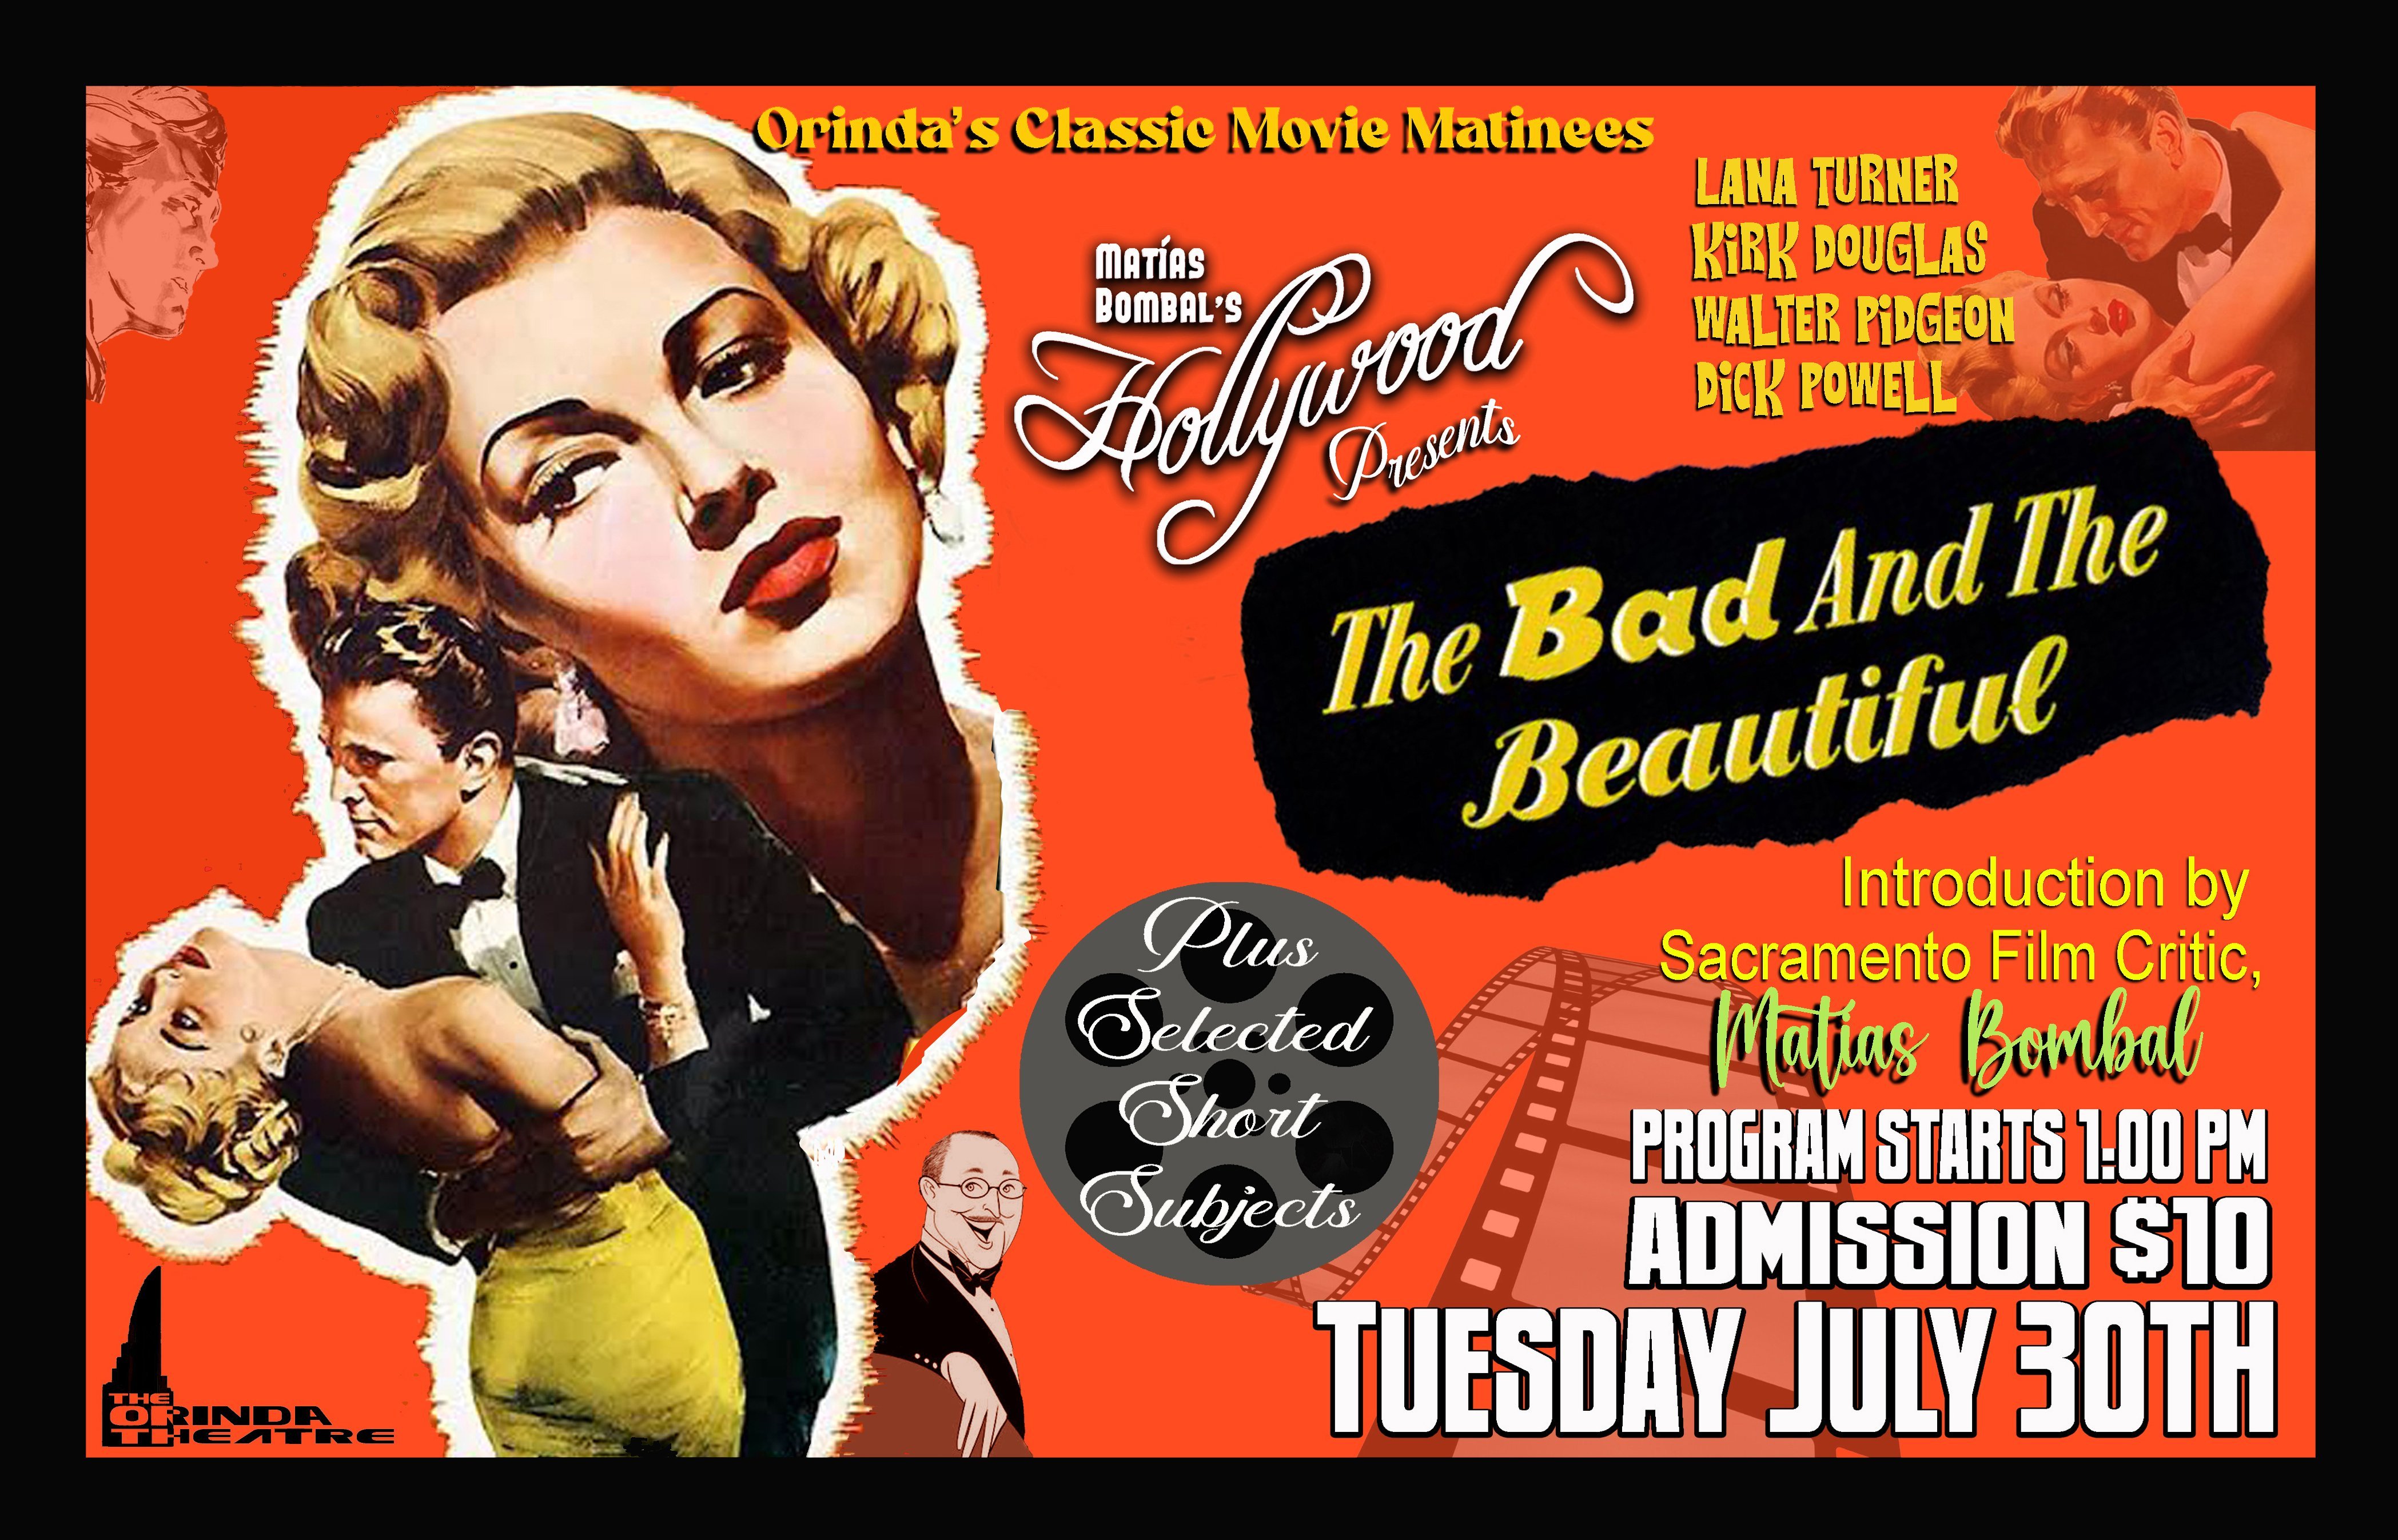 Orinda Theatre's Classic Movie Matinee (last Tuesday of each month)